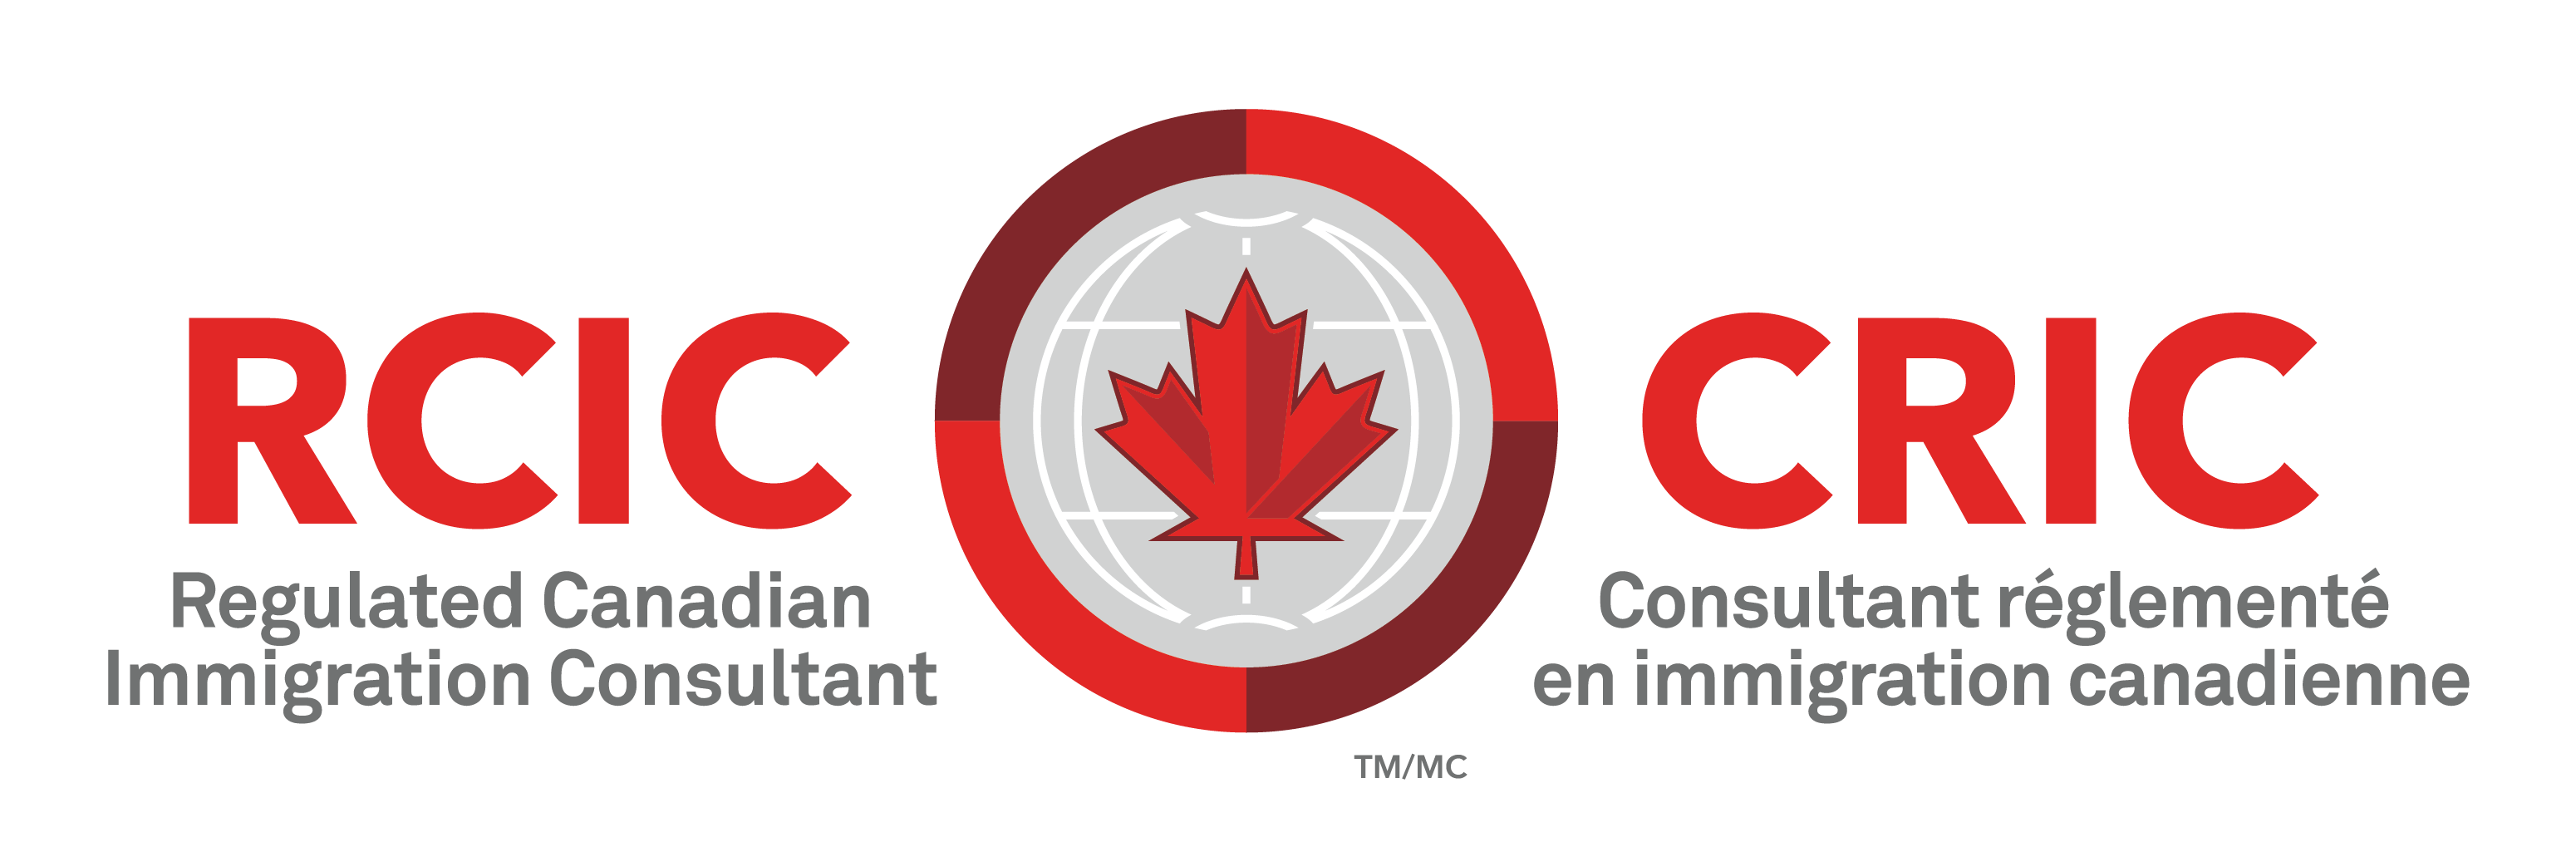 beyond canada immigration rcic verification and partner